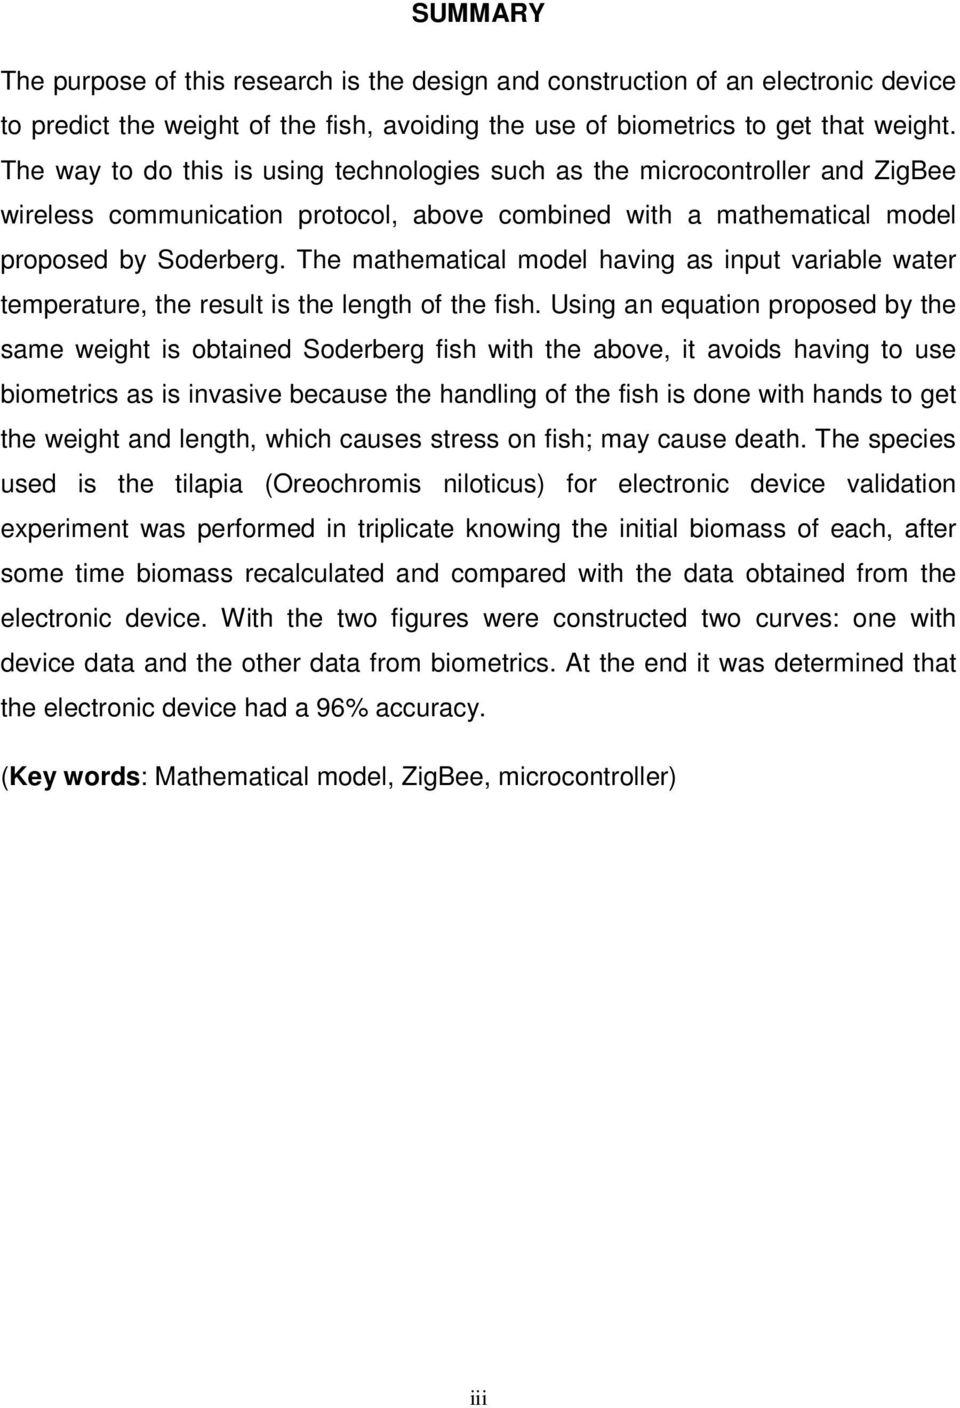 The mathematical model having as input variable water temperature, the result is the length of the fish.